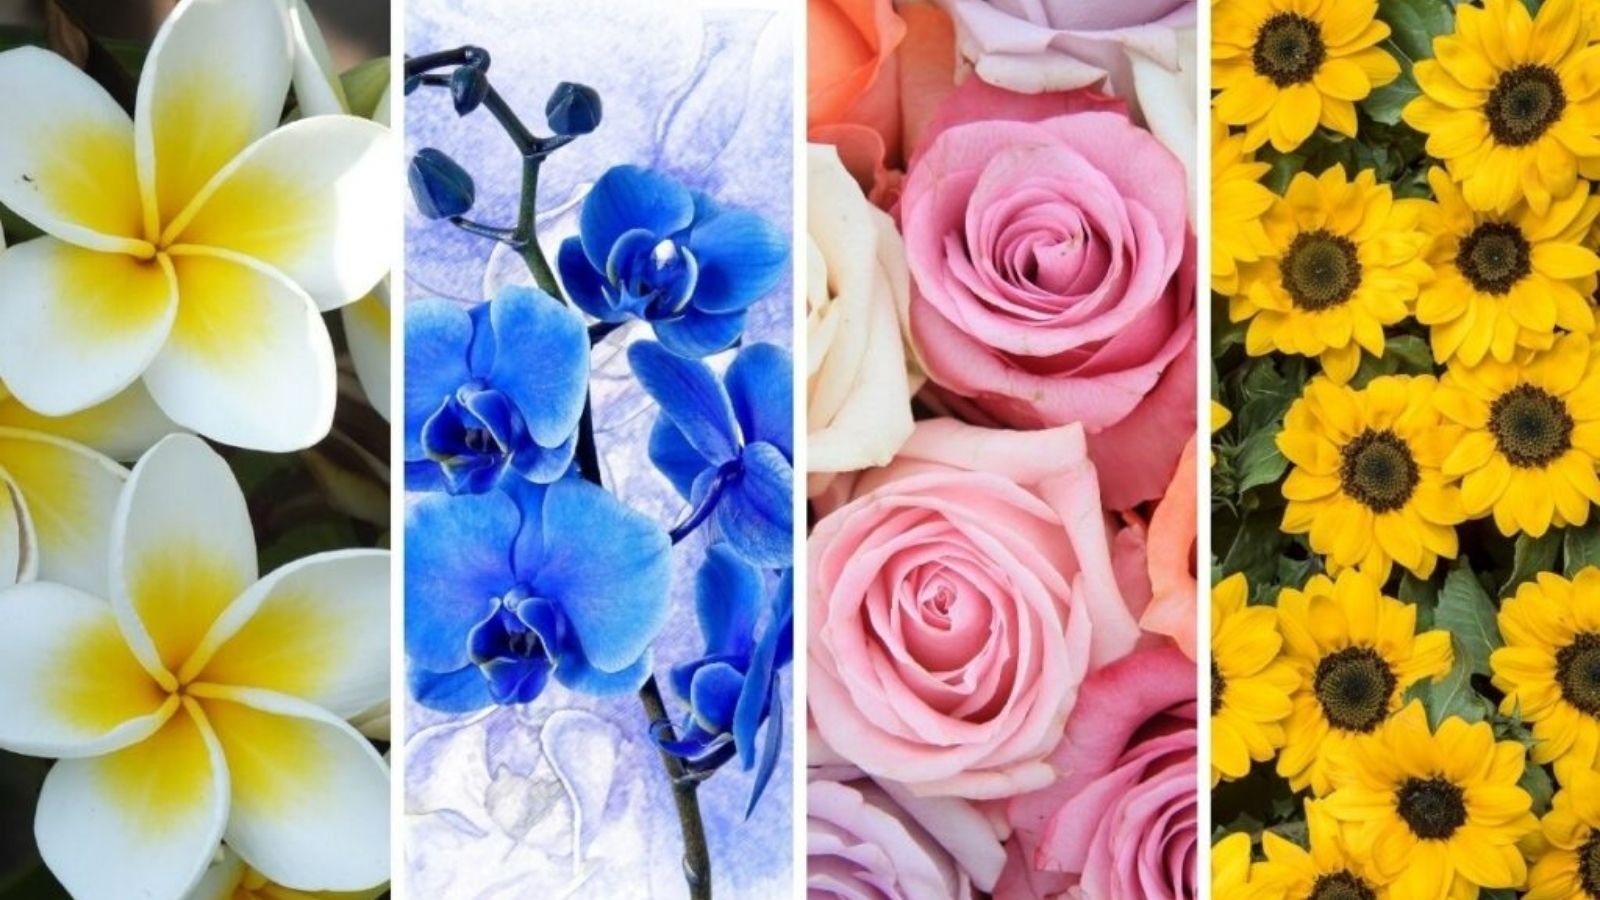 Quiz: The flower you choose will reveal the biggest challenge awaiting you 1